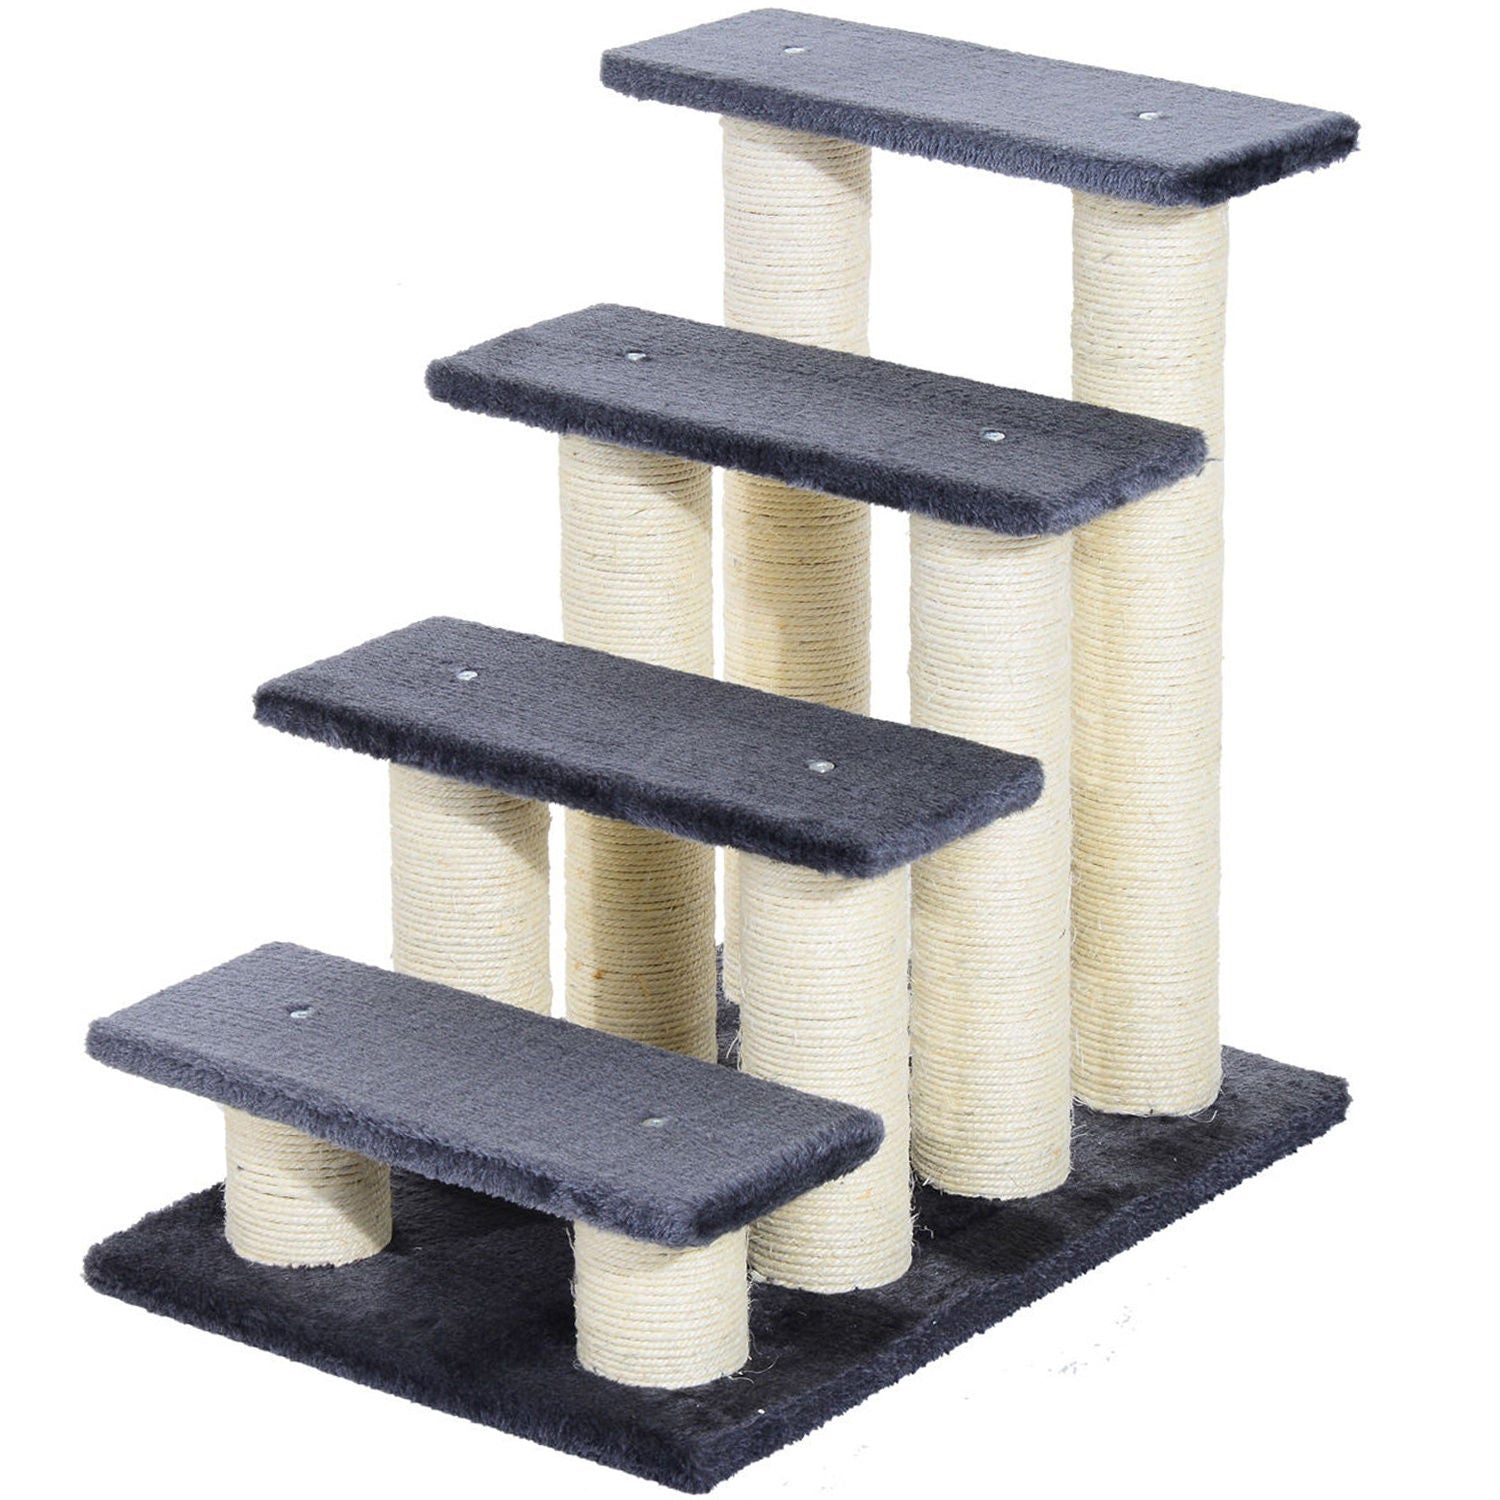 Nancy's Big Hill Animal Stairs Cat Stairs Dog Stairs 4 Steps Stairs for Cats and Dogs Plush